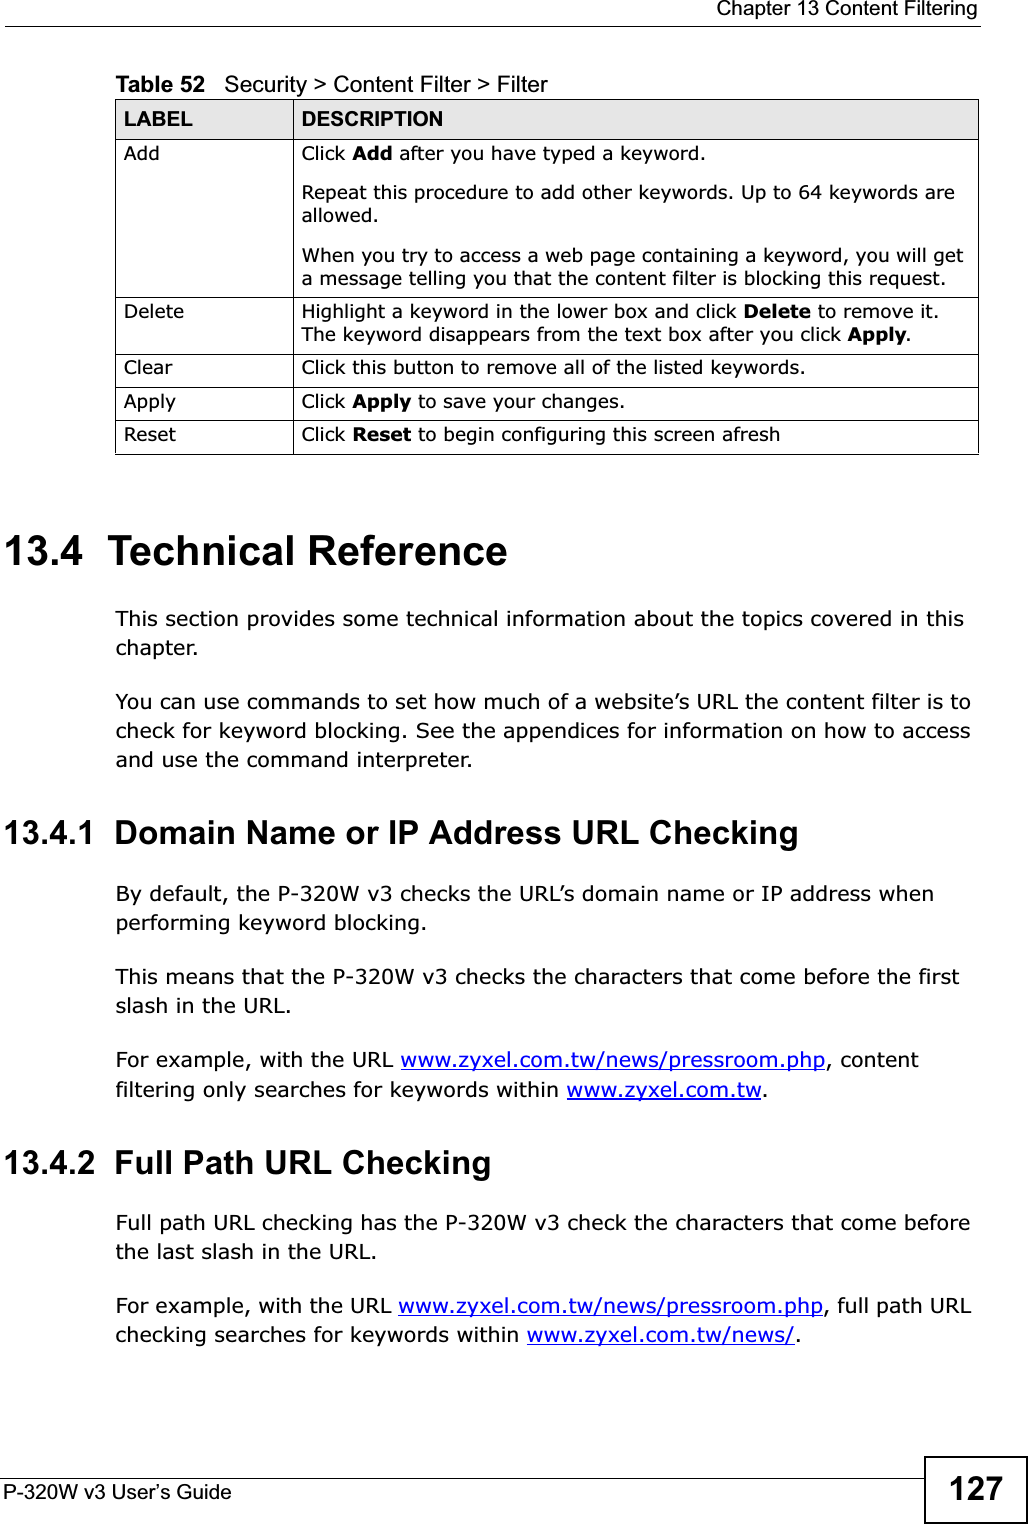  Chapter 13 Content FilteringP-320W v3 User’s Guide 12713.4  Technical ReferenceThis section provides some technical information about the topics covered in this chapter.You can use commands to set how much of a website’s URL the content filter is to check for keyword blocking. See the appendices for information on how to access and use the command interpreter.13.4.1  Domain Name or IP Address URL CheckingBy default, the P-320W v3 checks the URL’s domain name or IP address when performing keyword blocking.This means that the P-320W v3 checks the characters that come before the first slash in the URL.For example, with the URL www.zyxel.com.tw/news/pressroom.php, content filtering only searches for keywords within www.zyxel.com.tw.13.4.2  Full Path URL CheckingFull path URL checking has the P-320W v3 check the characters that come before the last slash in the URL.For example, with the URL www.zyxel.com.tw/news/pressroom.php, full path URL checking searches for keywords within www.zyxel.com.tw/news/.Add  Click Add after you have typed a keyword. Repeat this procedure to add other keywords. Up to 64 keywords are allowed.When you try to access a web page containing a keyword, you will get a message telling you that the content filter is blocking this request.Delete Highlight a keyword in the lower box and click Delete to remove it. The keyword disappears from the text box after you click Apply.Clear Click this button to remove all of the listed keywords.Apply Click Apply to save your changes.Reset Click Reset to begin configuring this screen afreshTable 52   Security &gt; Content Filter &gt; FilterLABEL DESCRIPTION